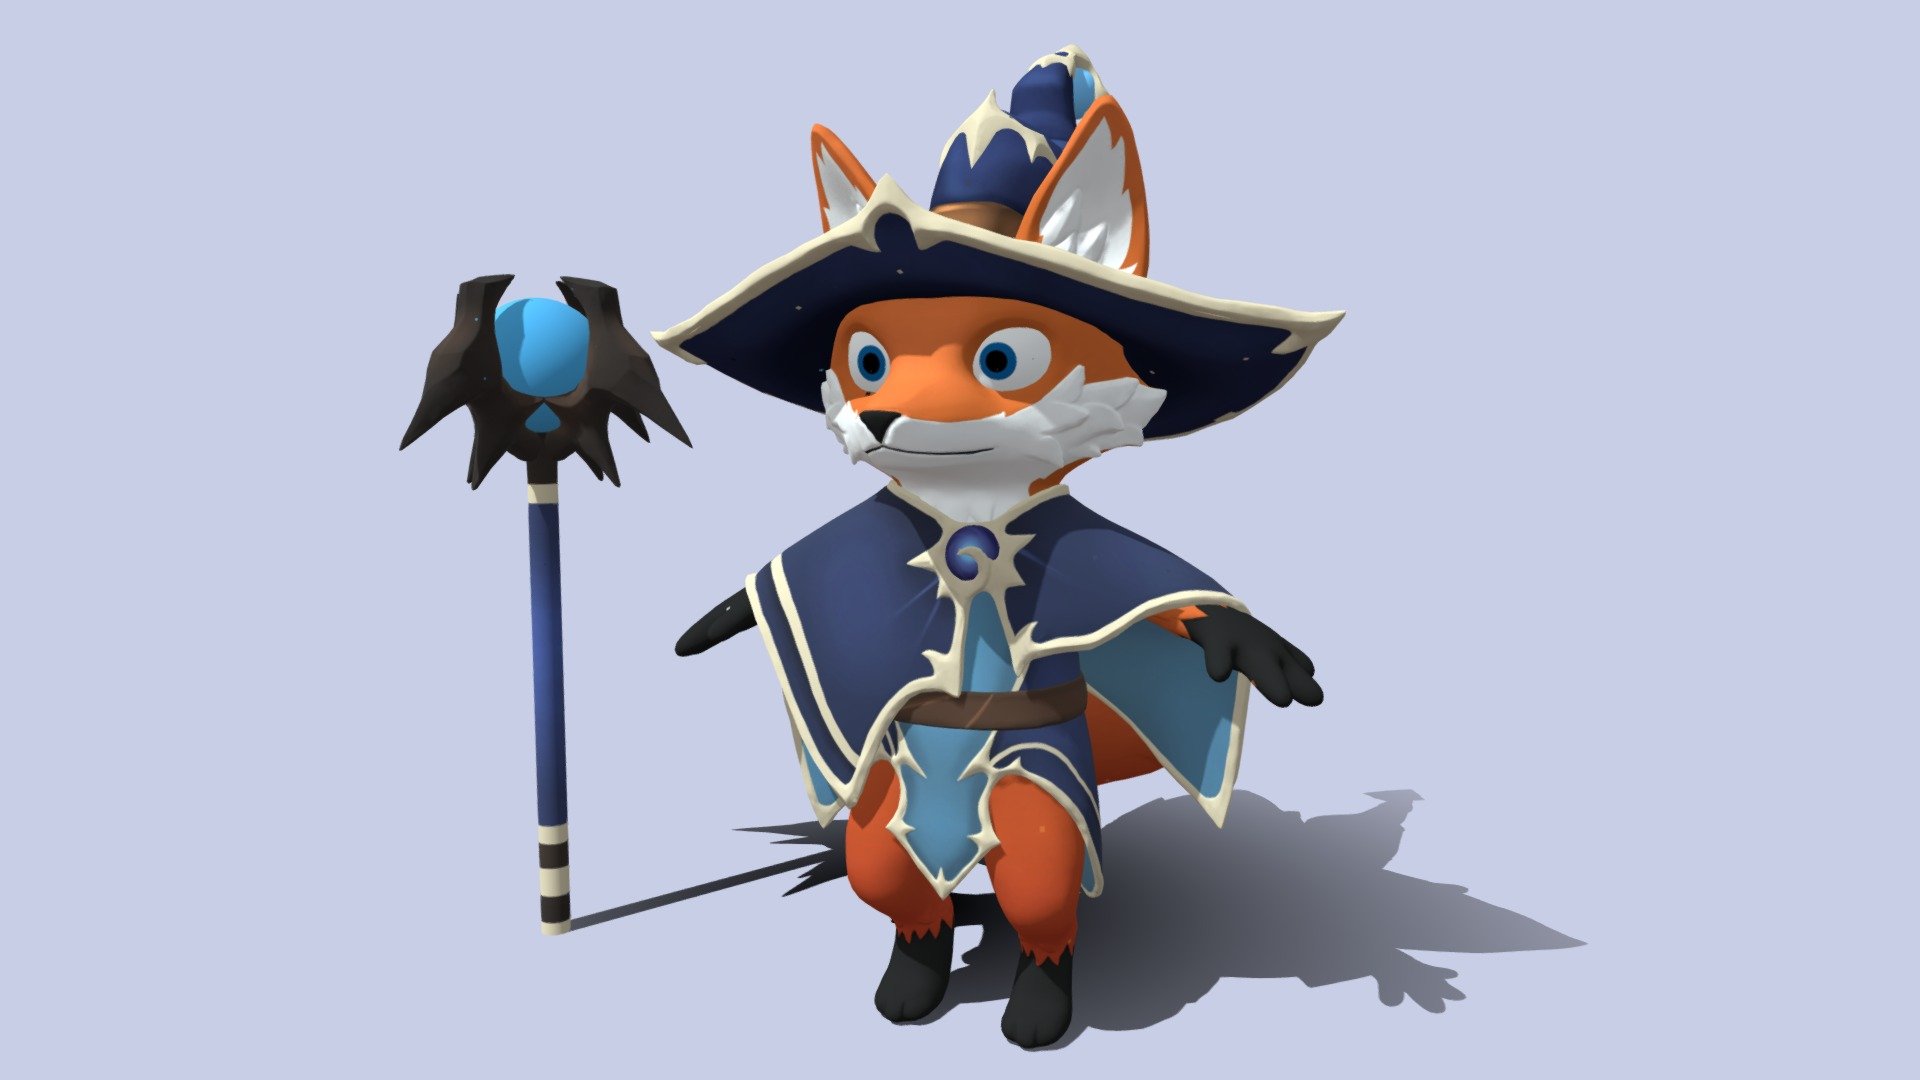 Finished version of the Lil' Fox character I made 
Critique/Feedback appreciated! c;
https://www.artstation.com/artwork/Ze0xz8 - Fox Mage Character - Download Free 3D model by MasterVi 3d model